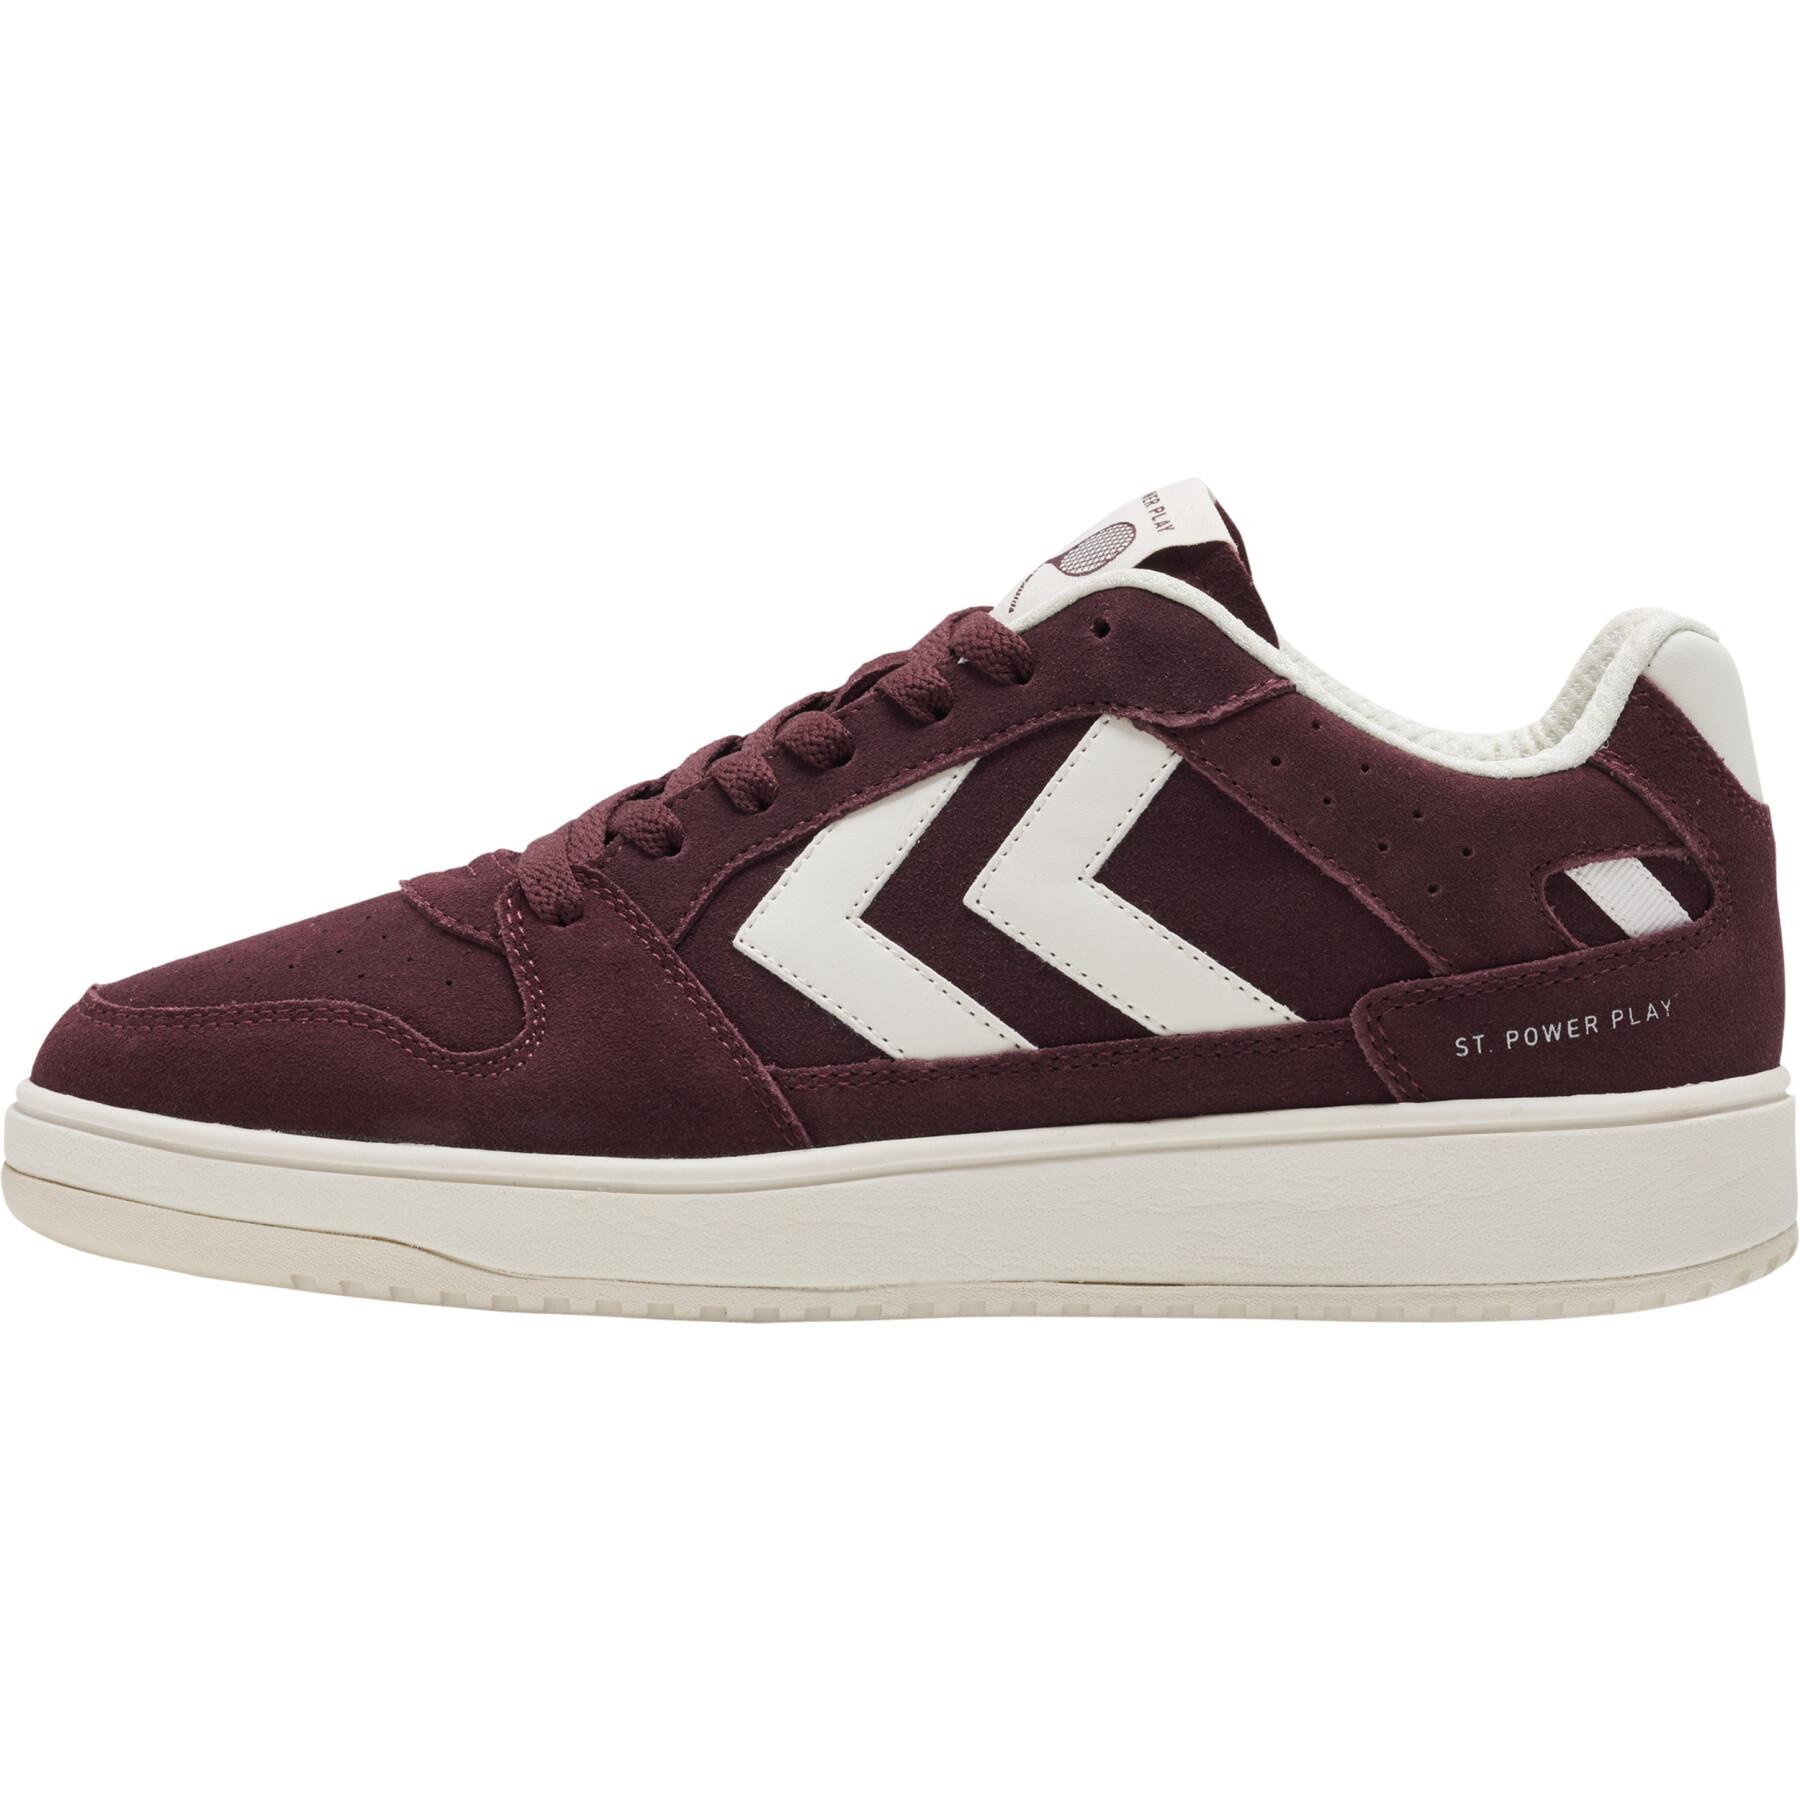 - Suede - Brands - Lifestyle St. Power Hummel Sneakers Play Hummel